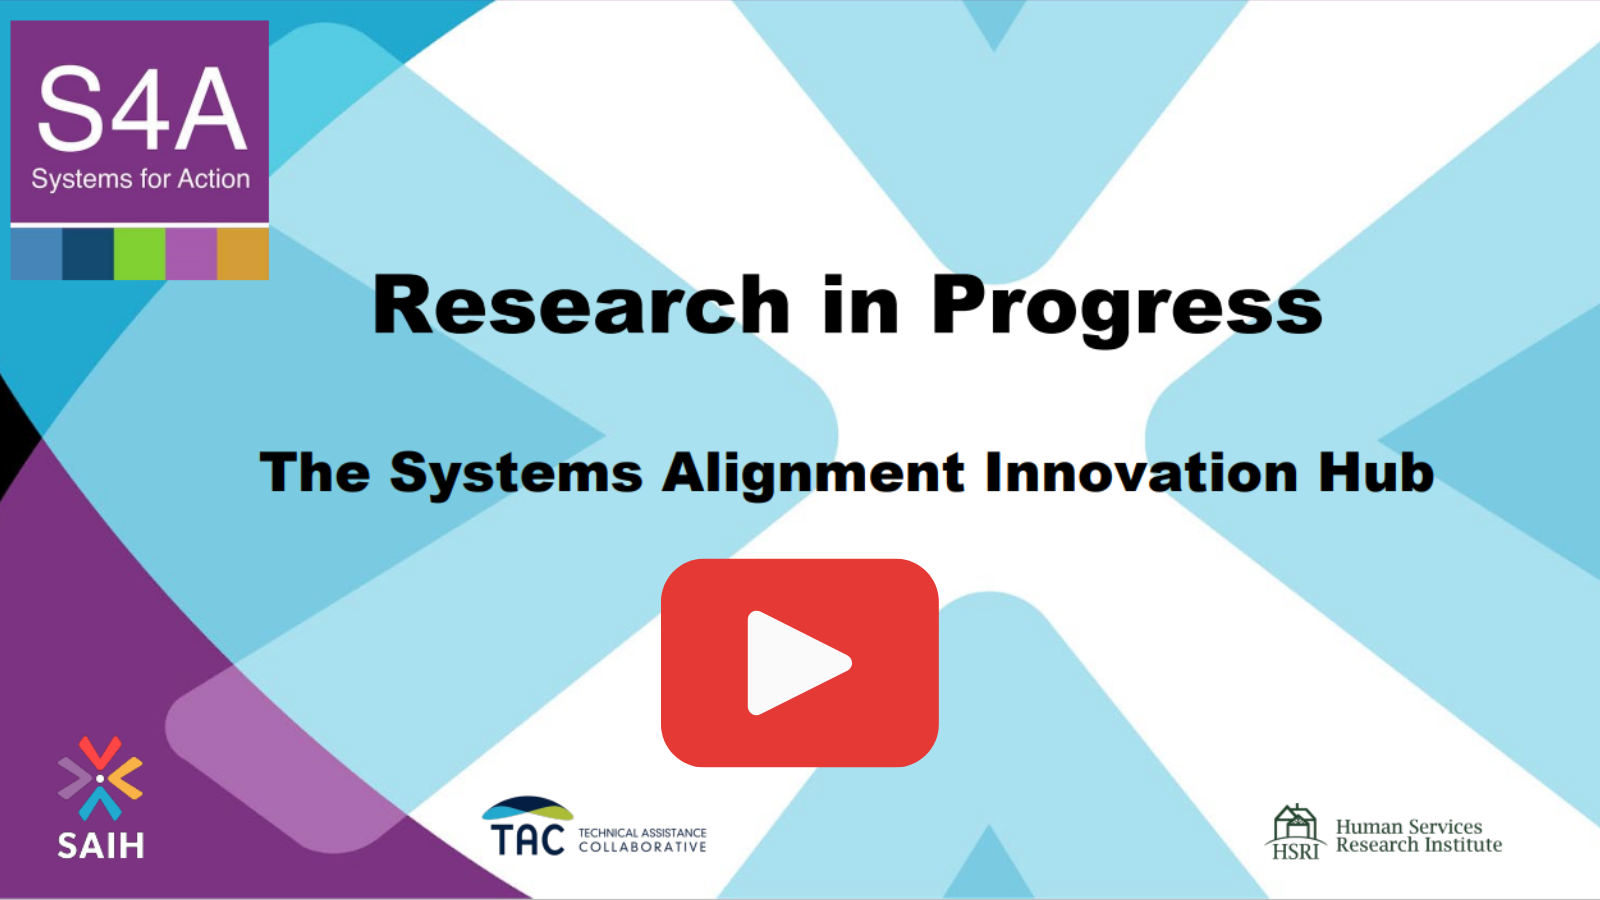 Watch Recording of Overview of the System Alignment Innovation Hub